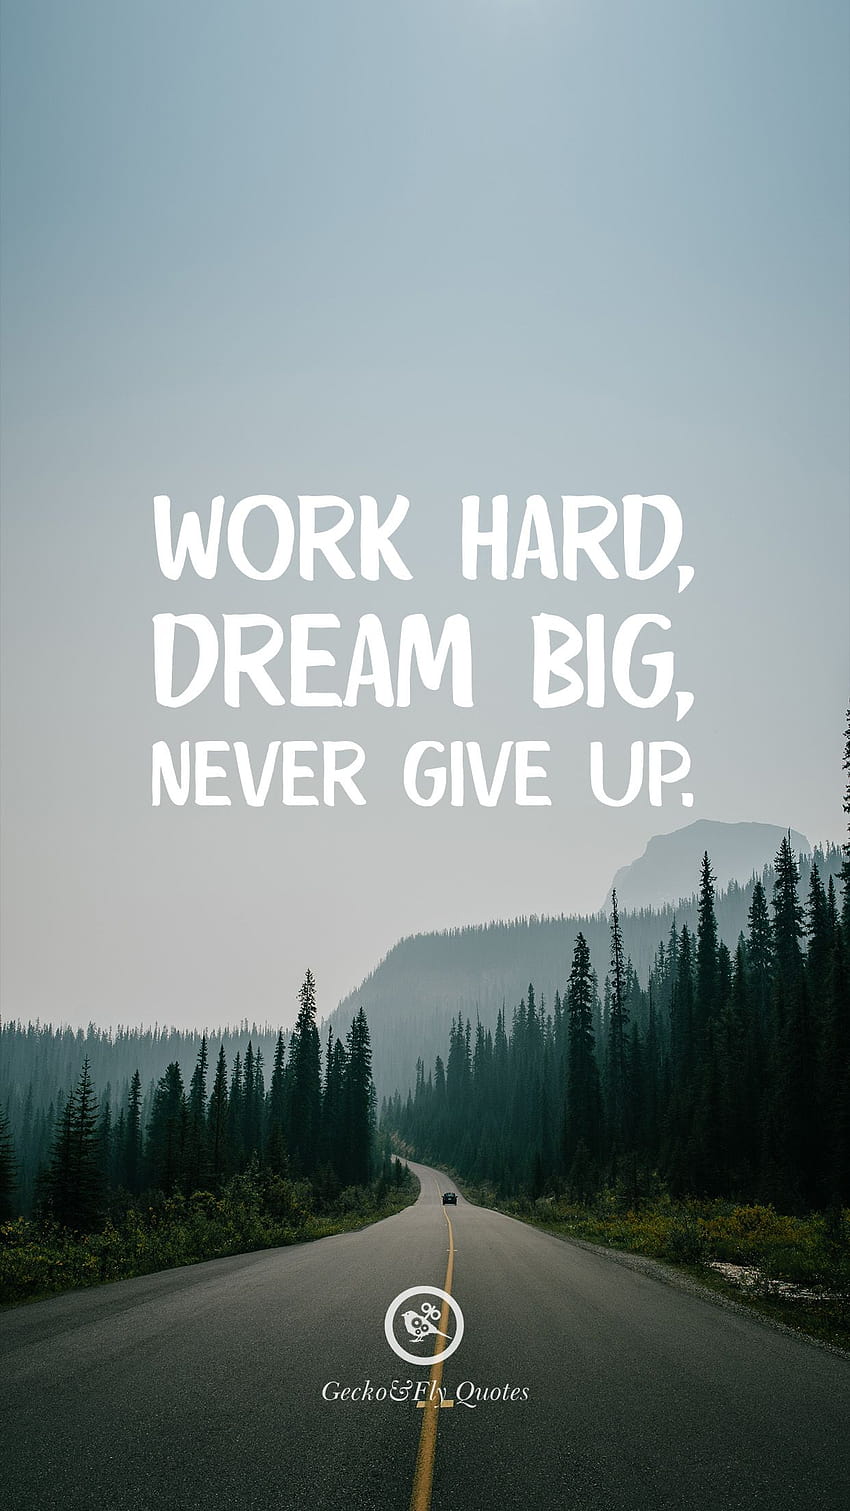 Never Give Up posted by Ryan Walker, never give up android HD phone wallpaper